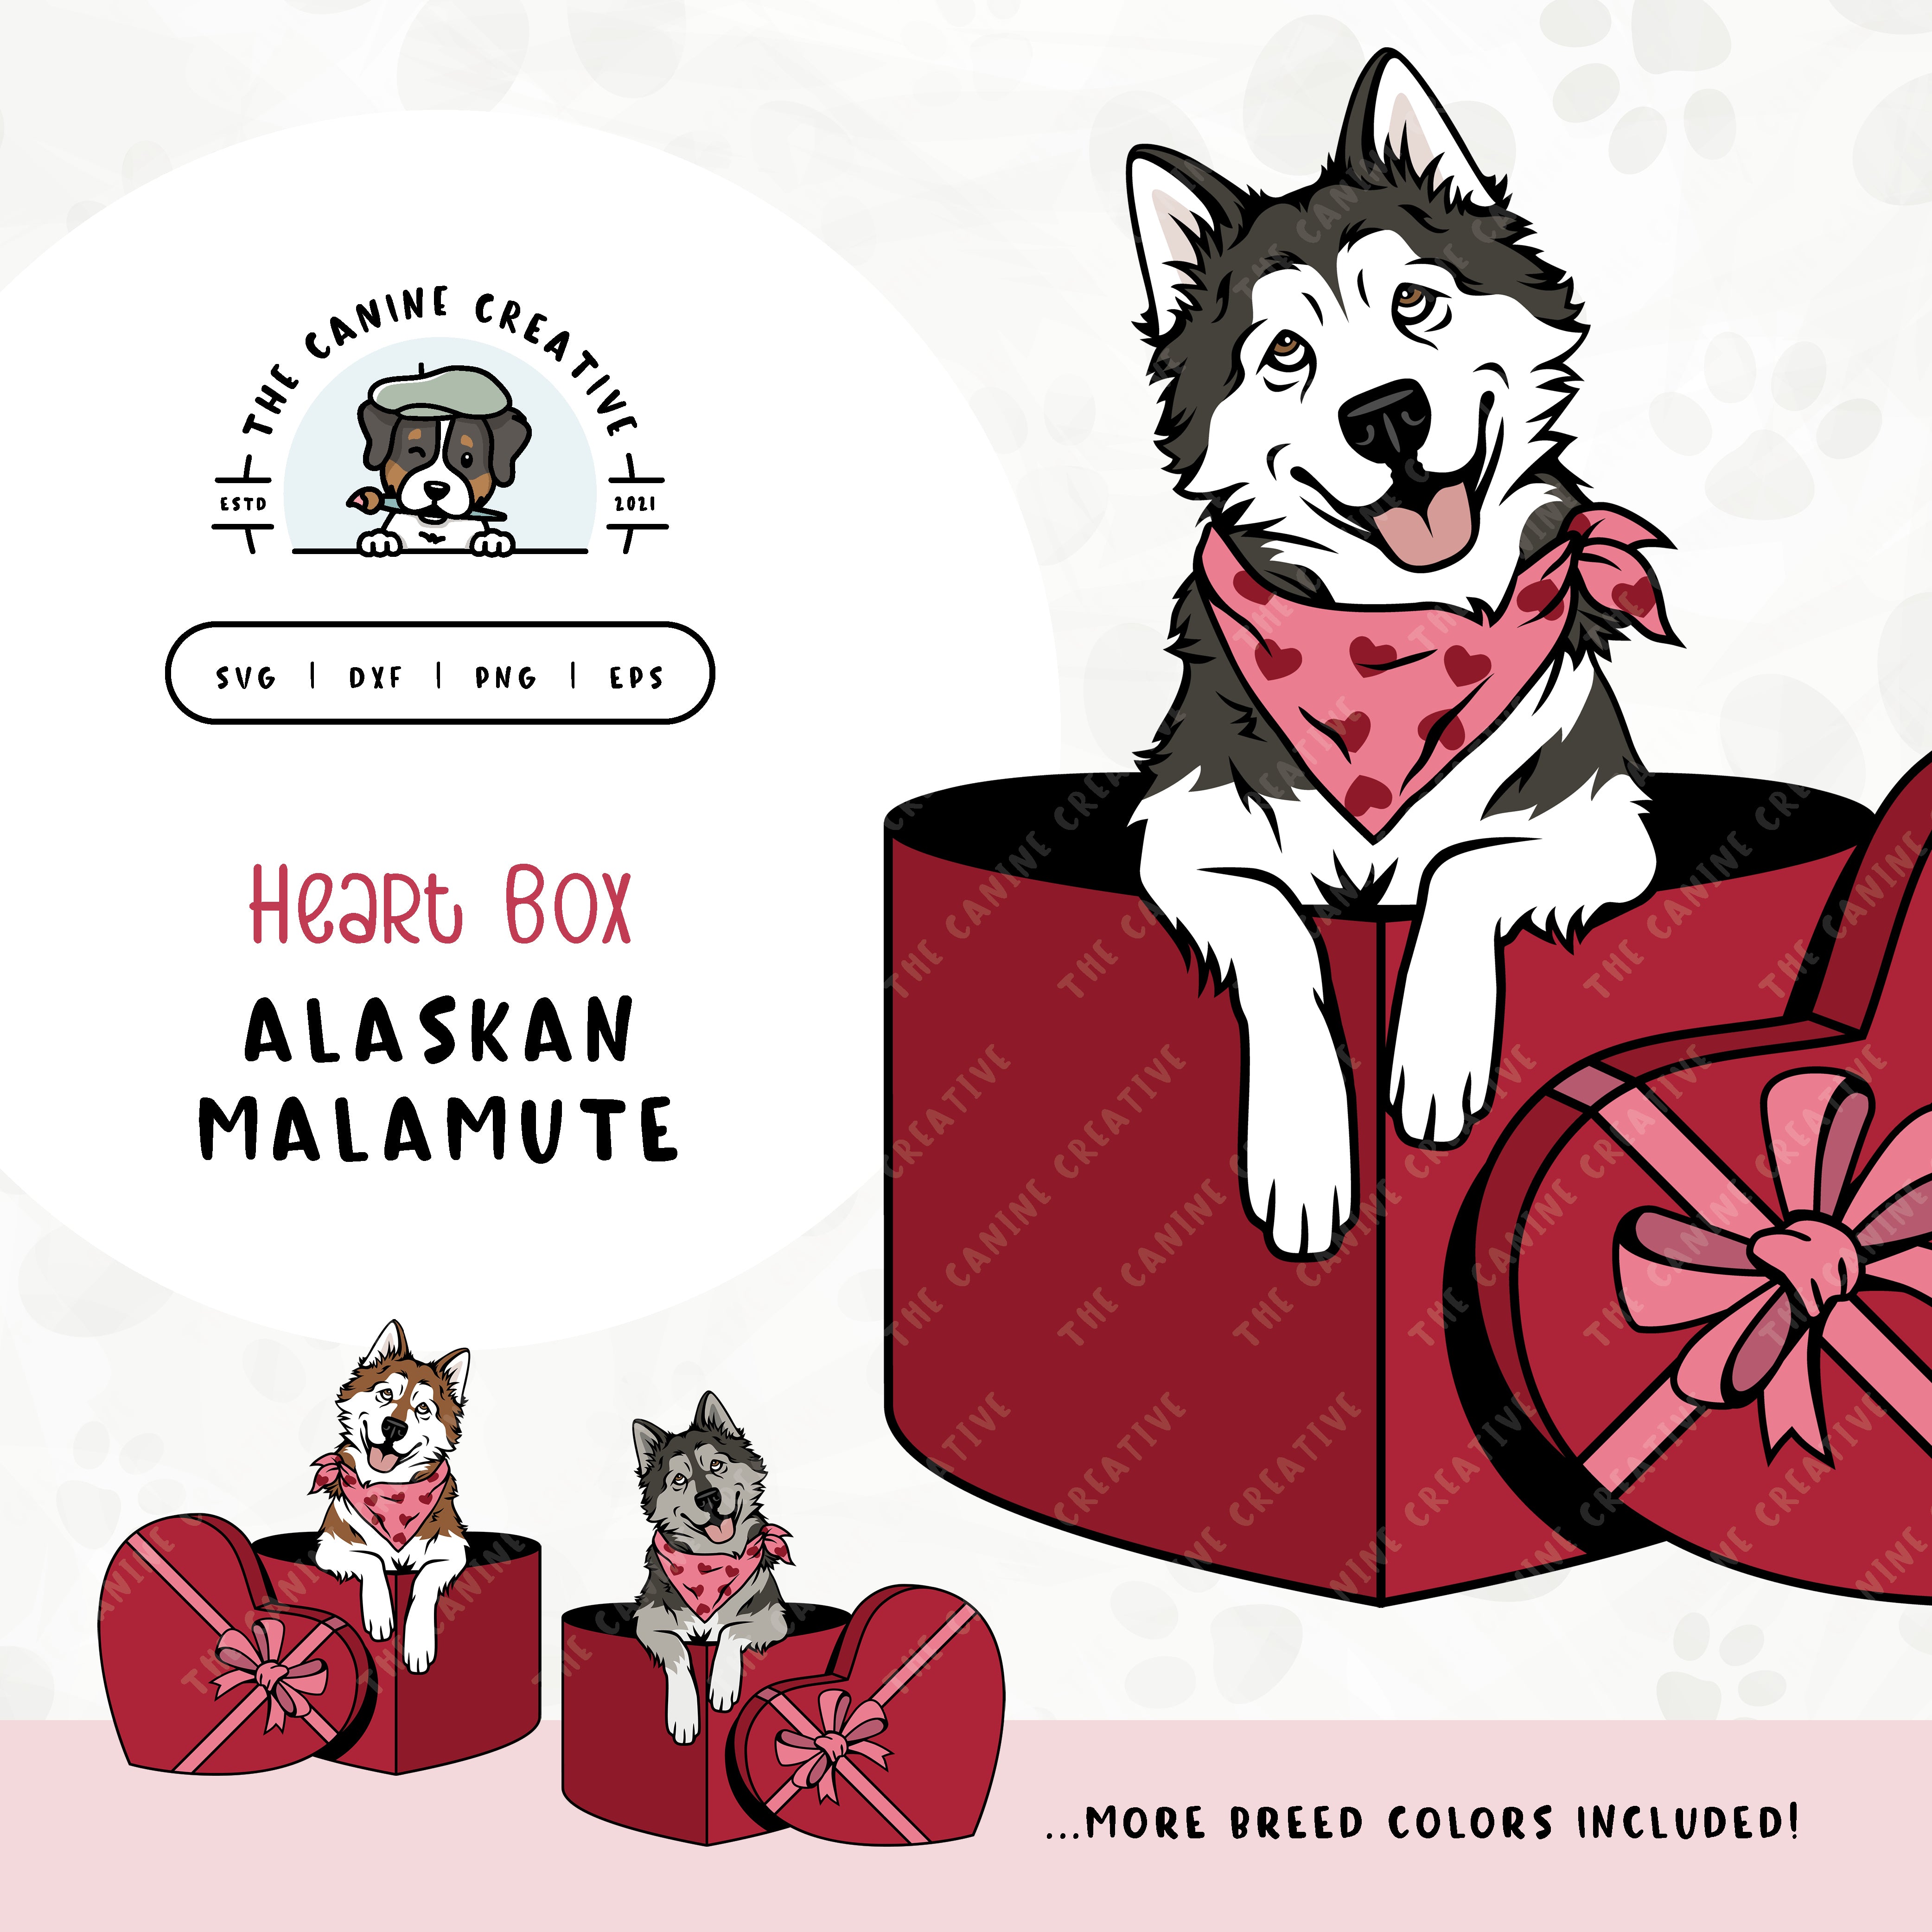 This charming Alaskan Malamute illustration features a peeking dog in a heart-shaped box. File formats include: SVG, DXF, PNG, and EPS.